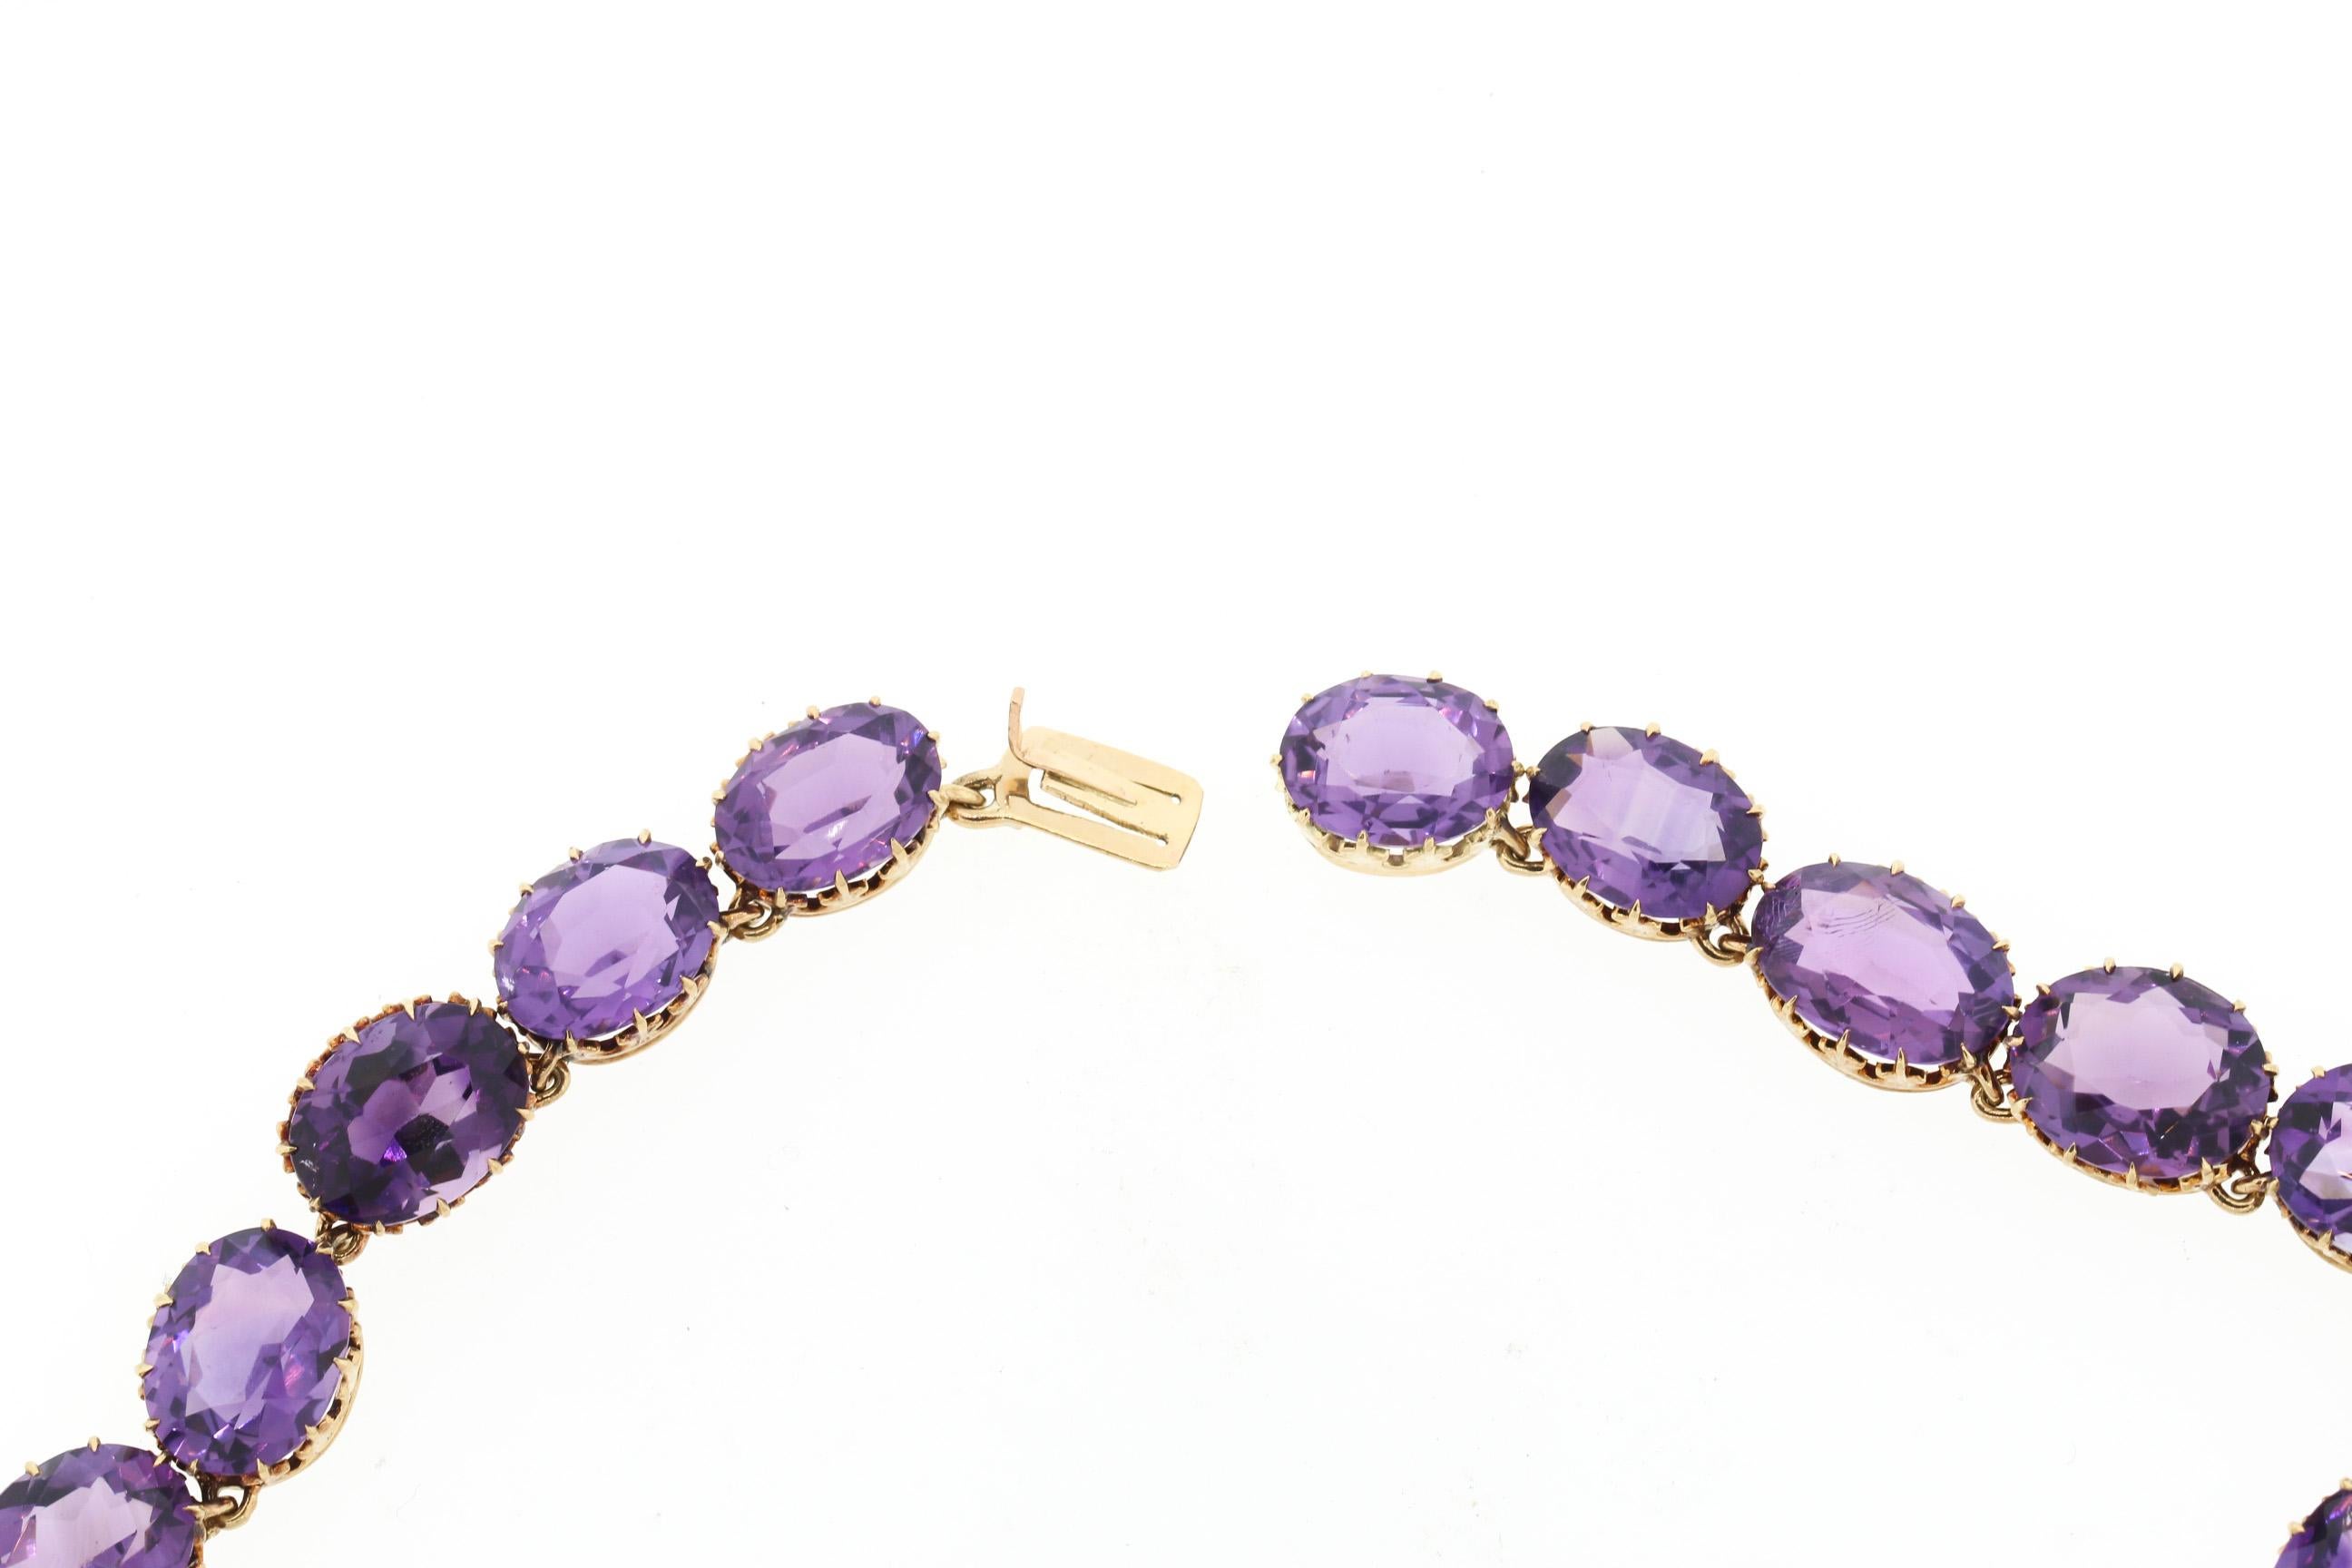 A beautiful antique Victorian 15k yellow gold oval shaped amethyst collet set rivière necklace, circa 1890. This necklace is set with non graduated oval shaped amethyst. The color of the amethyst is a dark rich purple hue, likely Russian in origin.